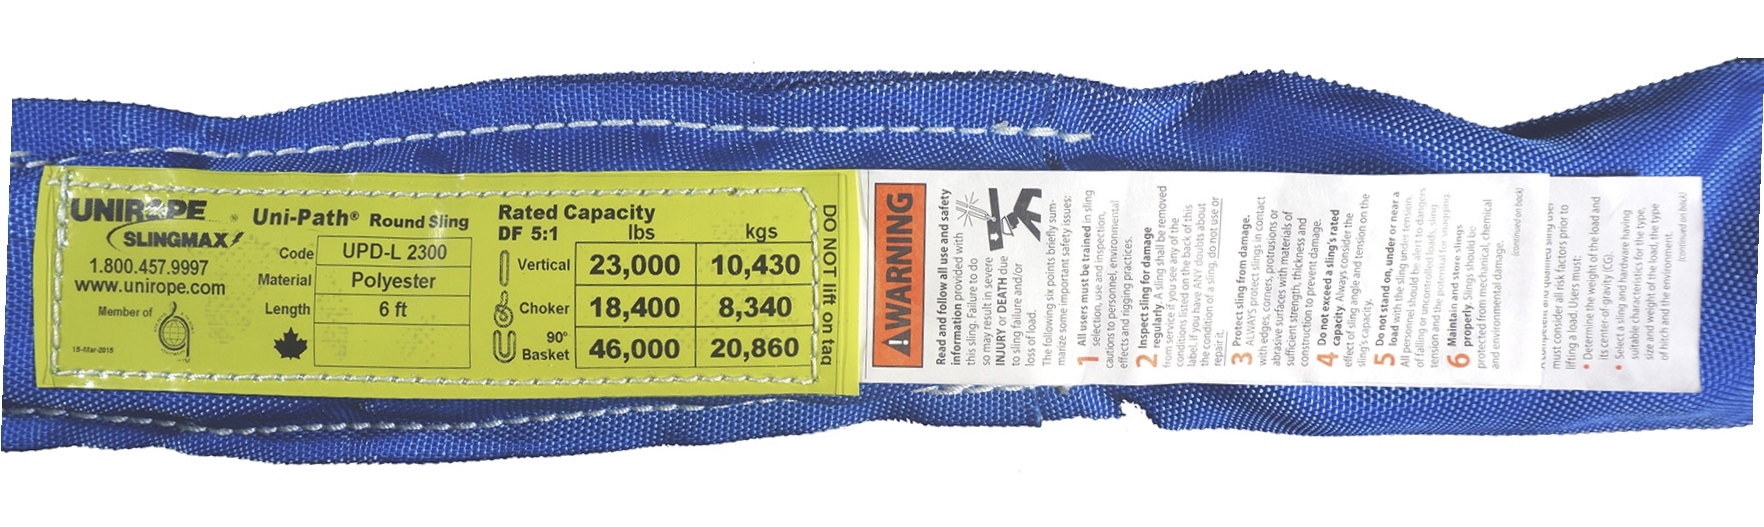 Design Factor and Sling Tags - Unirope Ltd.